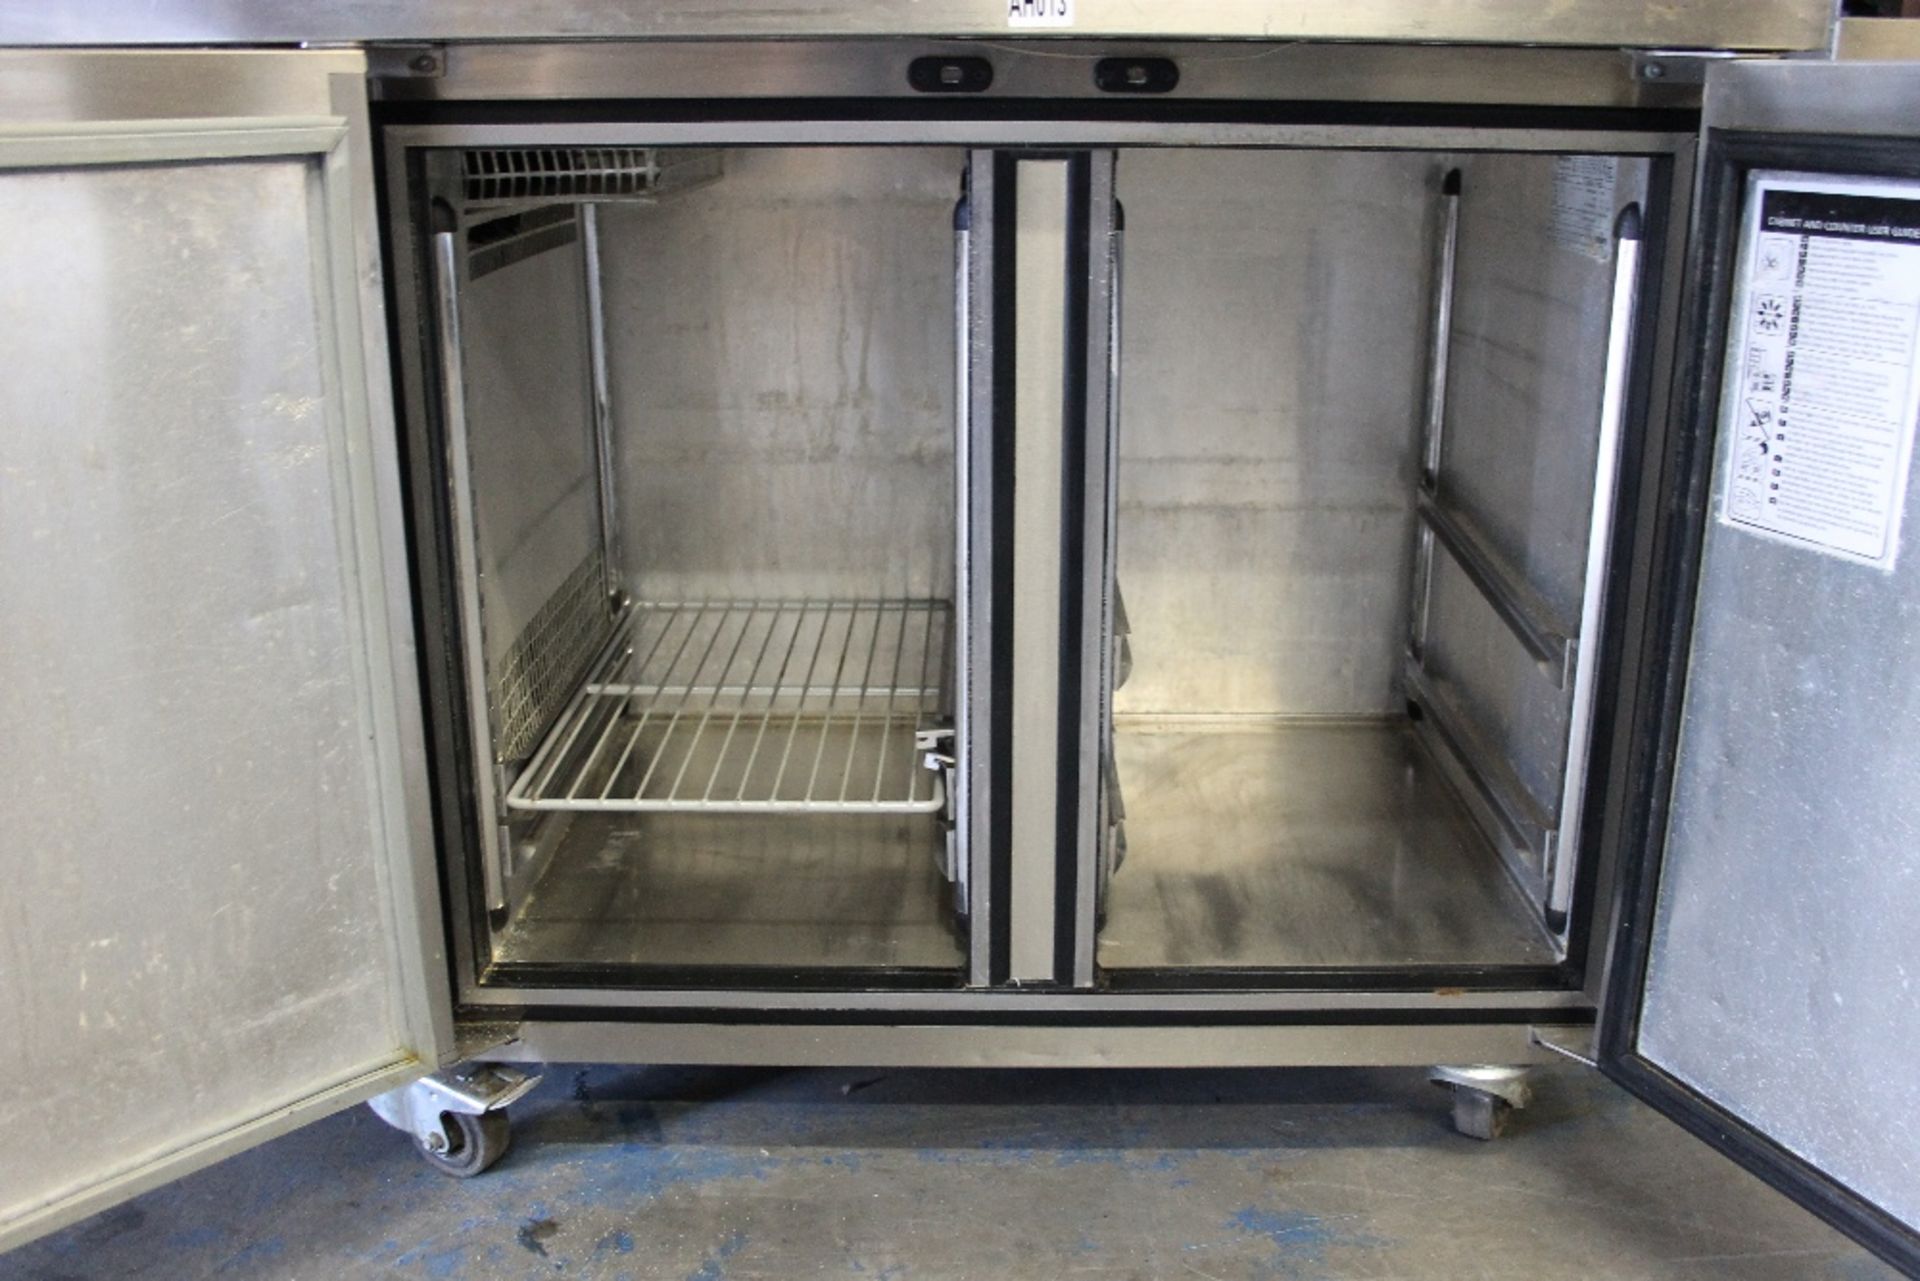 Foster Stainless Steel Two Door Bench Fridge -Model EPRO1/2H I Shelf -1ph – number of small dents to - Image 3 of 4